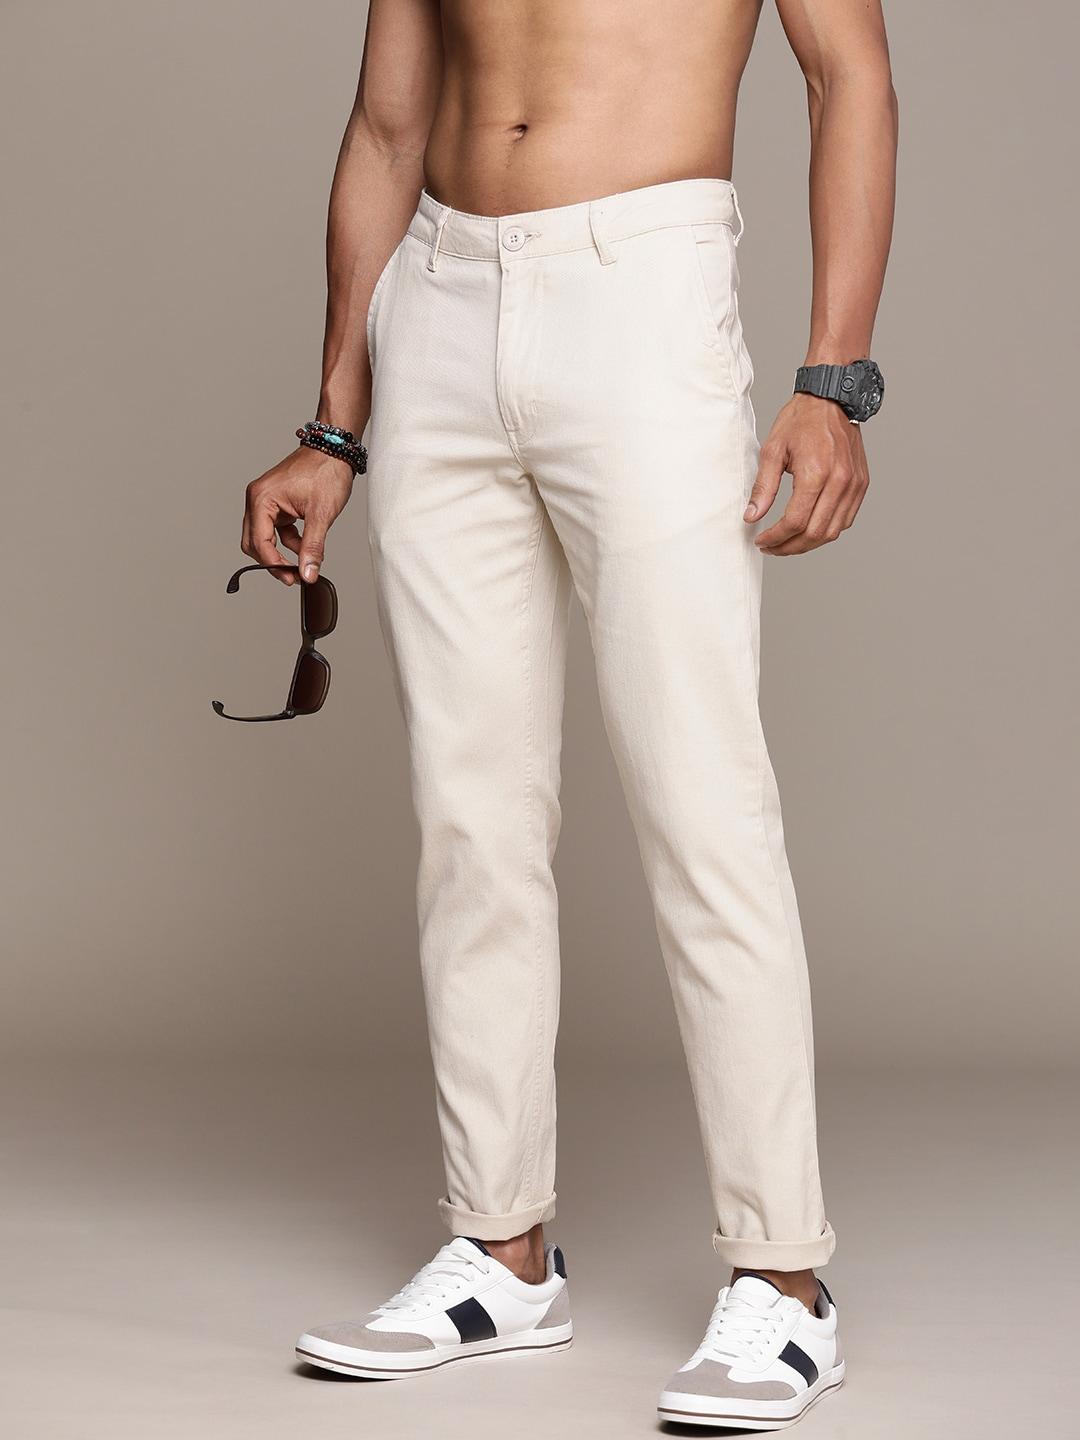 roadster-men-solid-chinos-trousers